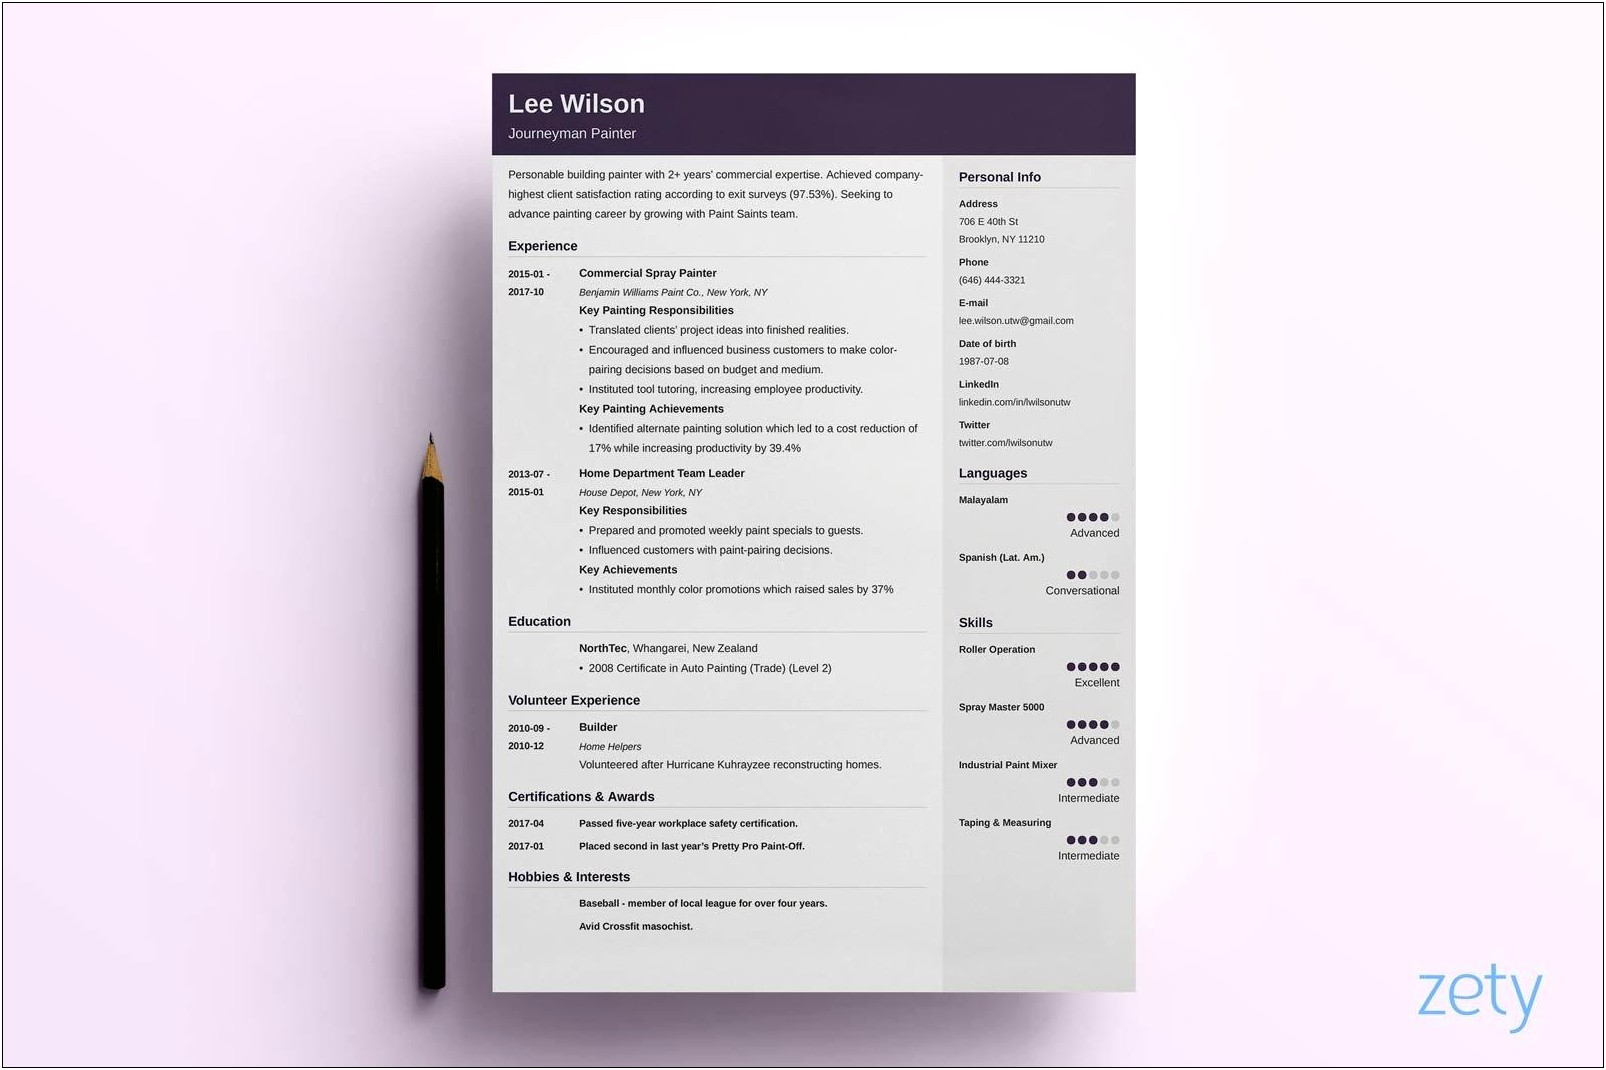 Free Downloadable Resume Templates For Word 2010